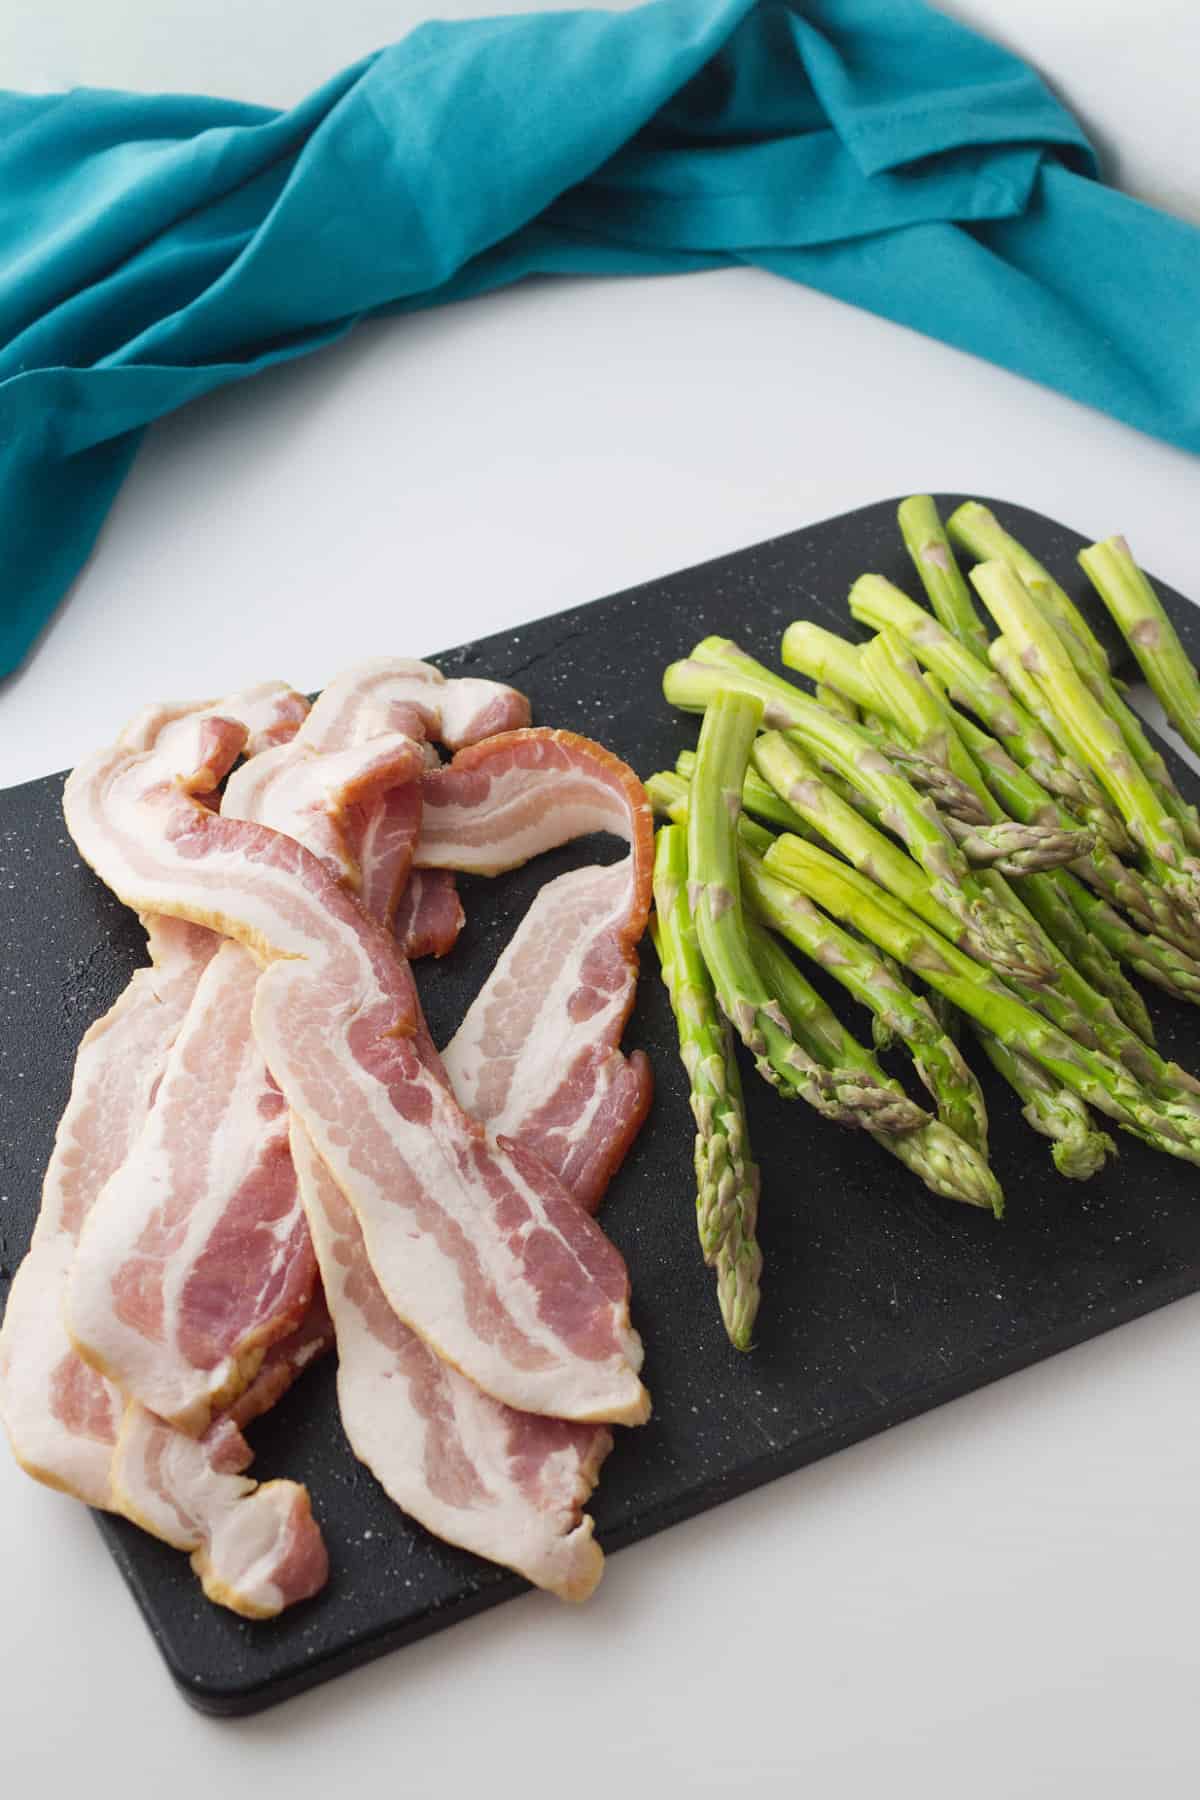 strips of bacon and spears of asparagus.